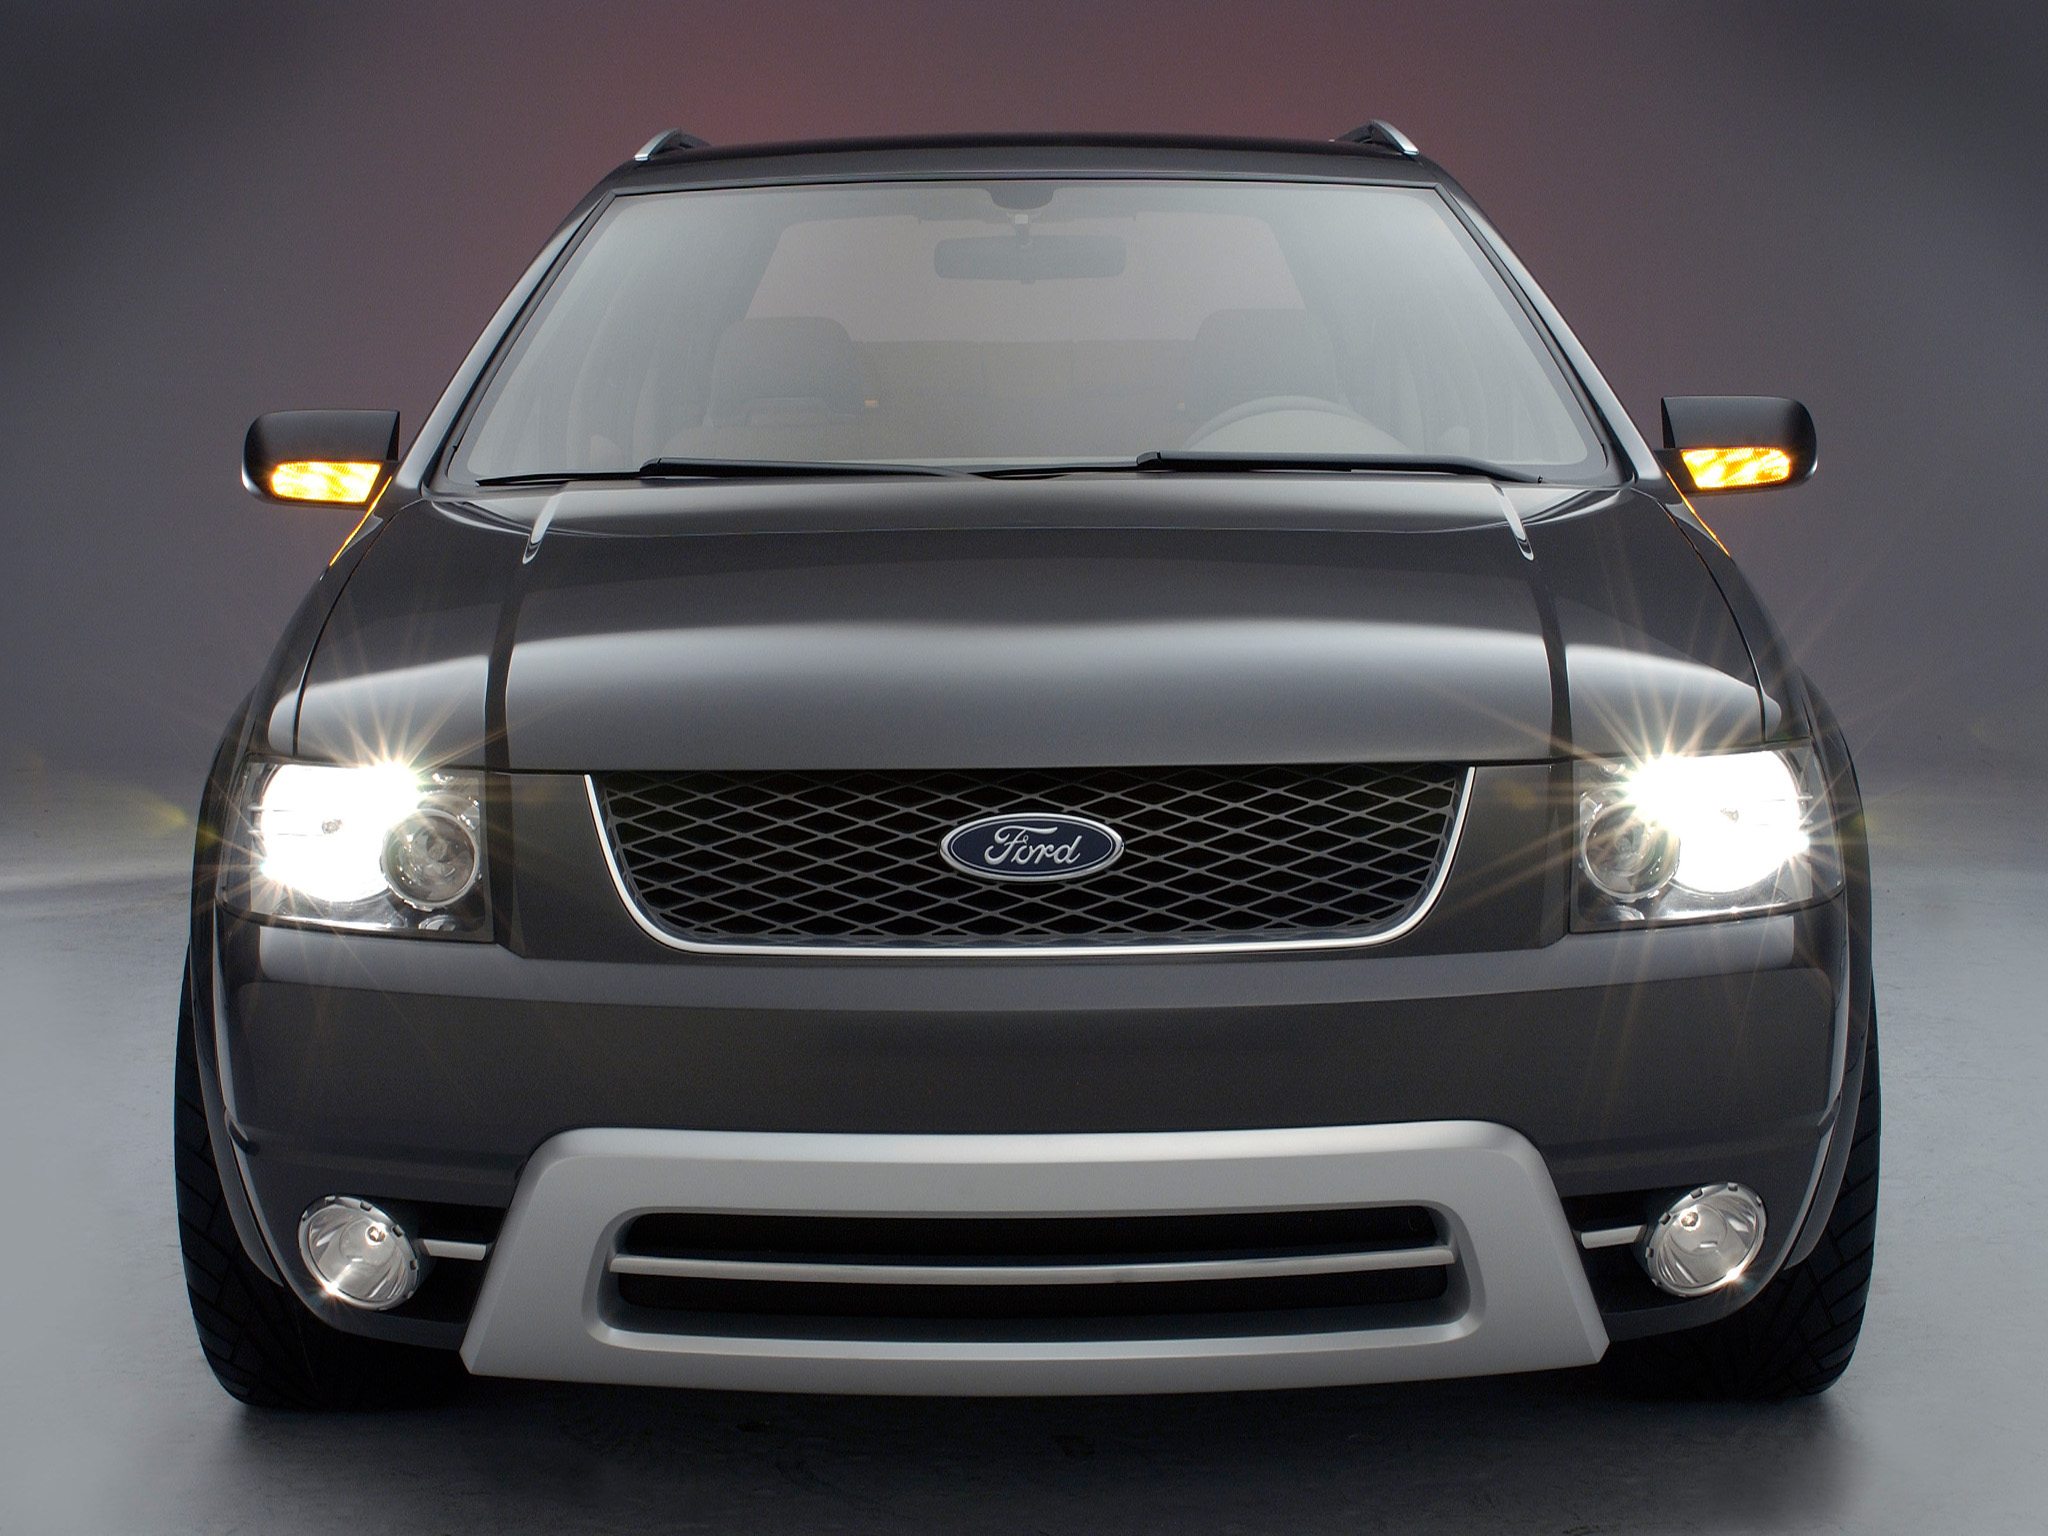 Ford Freestyle FX Concept, 2003